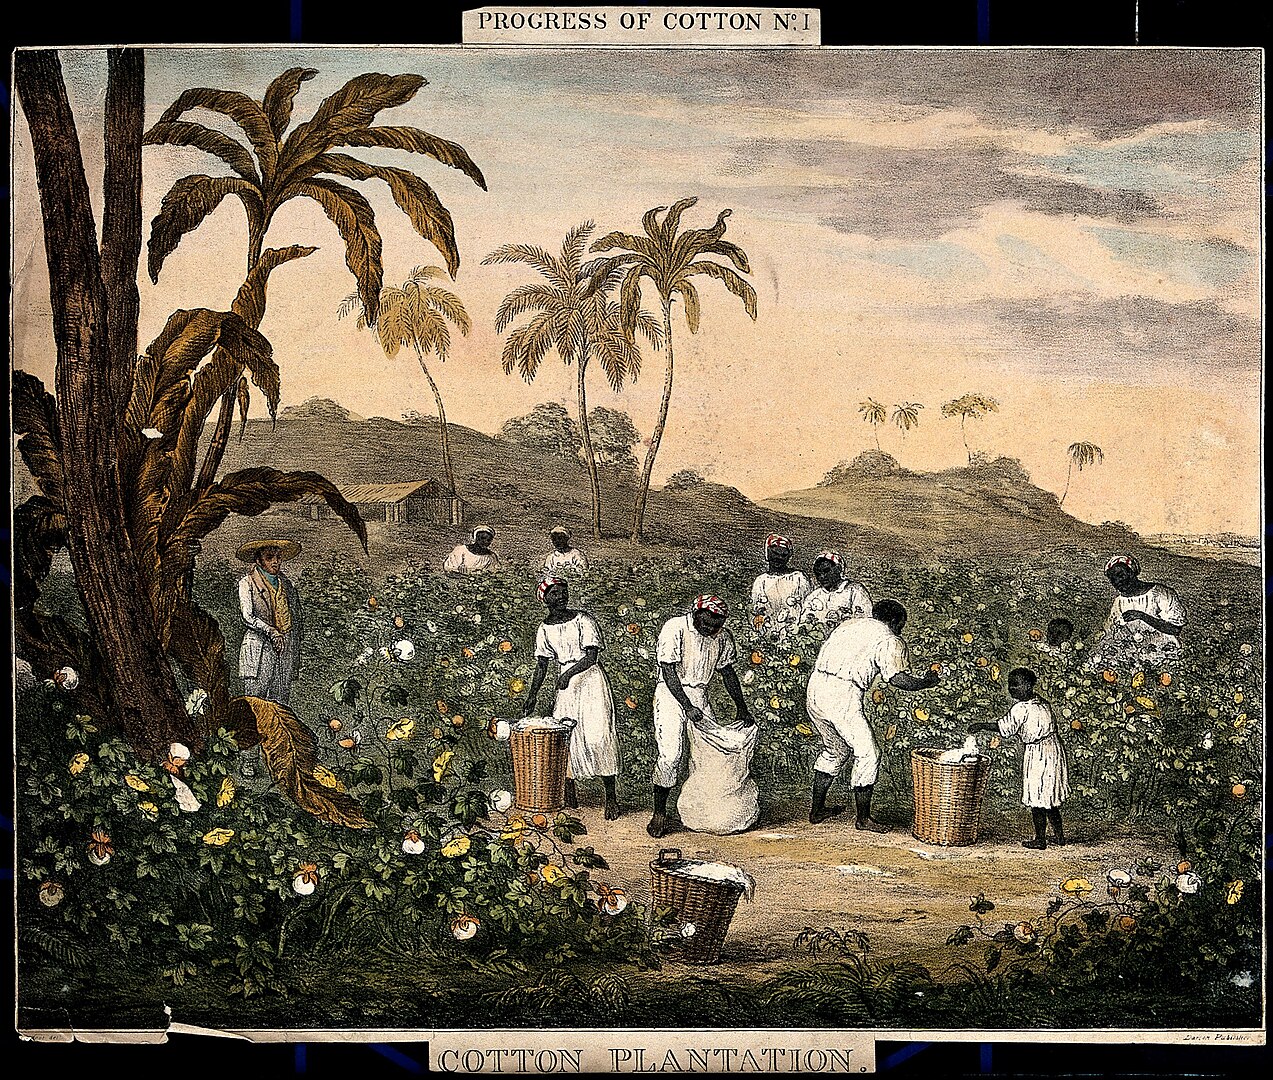 A large group of plantation workers stand in a cotton field with trees surrounding them.